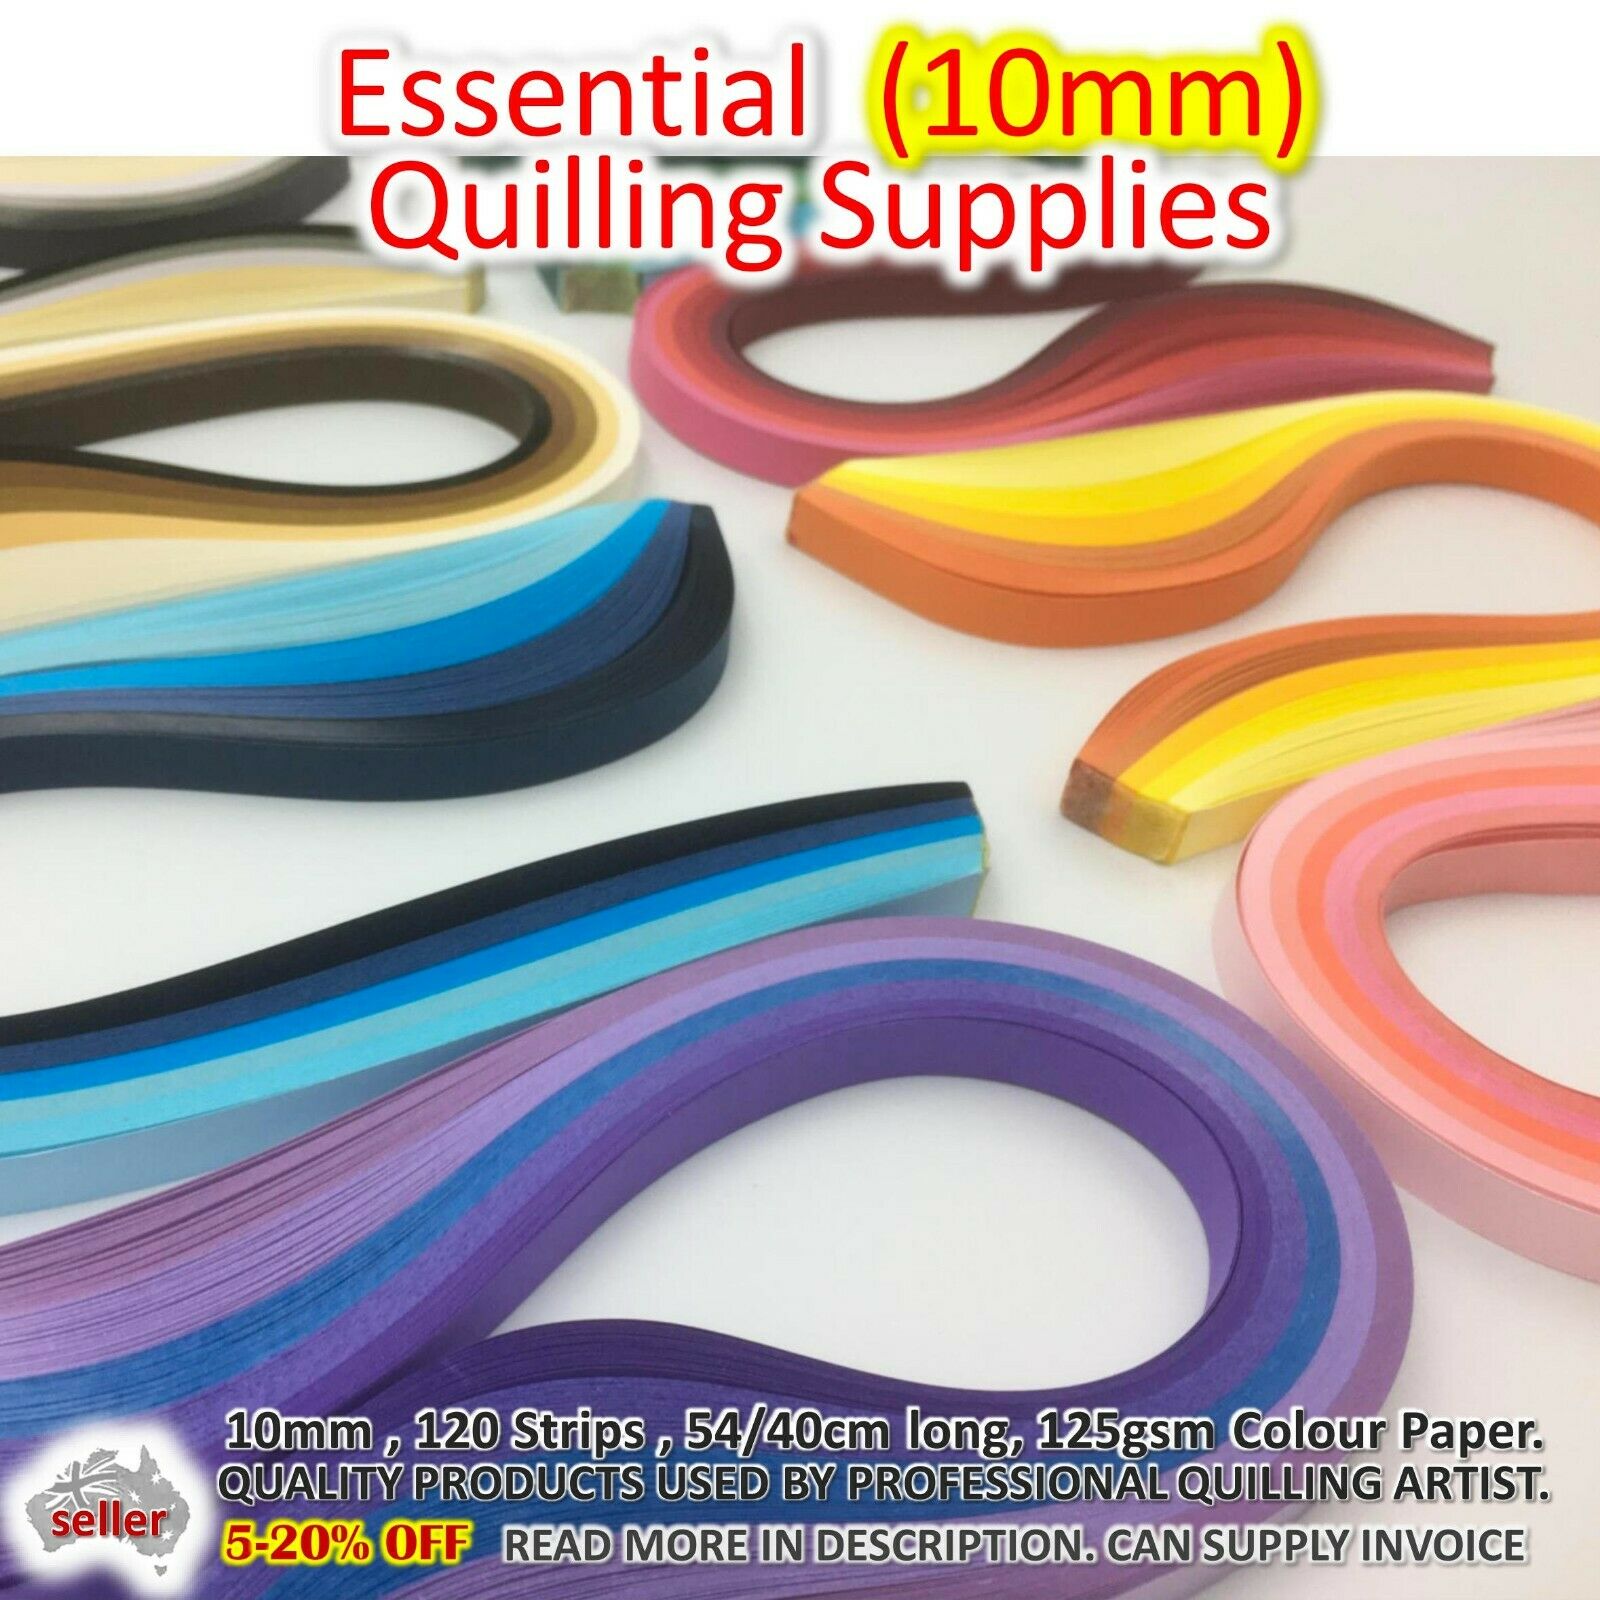 5mm*54cm 03 16 Colors Paper Quilling Strips Set Art Craft Kits Quilling Strips DIY Crafts Tool